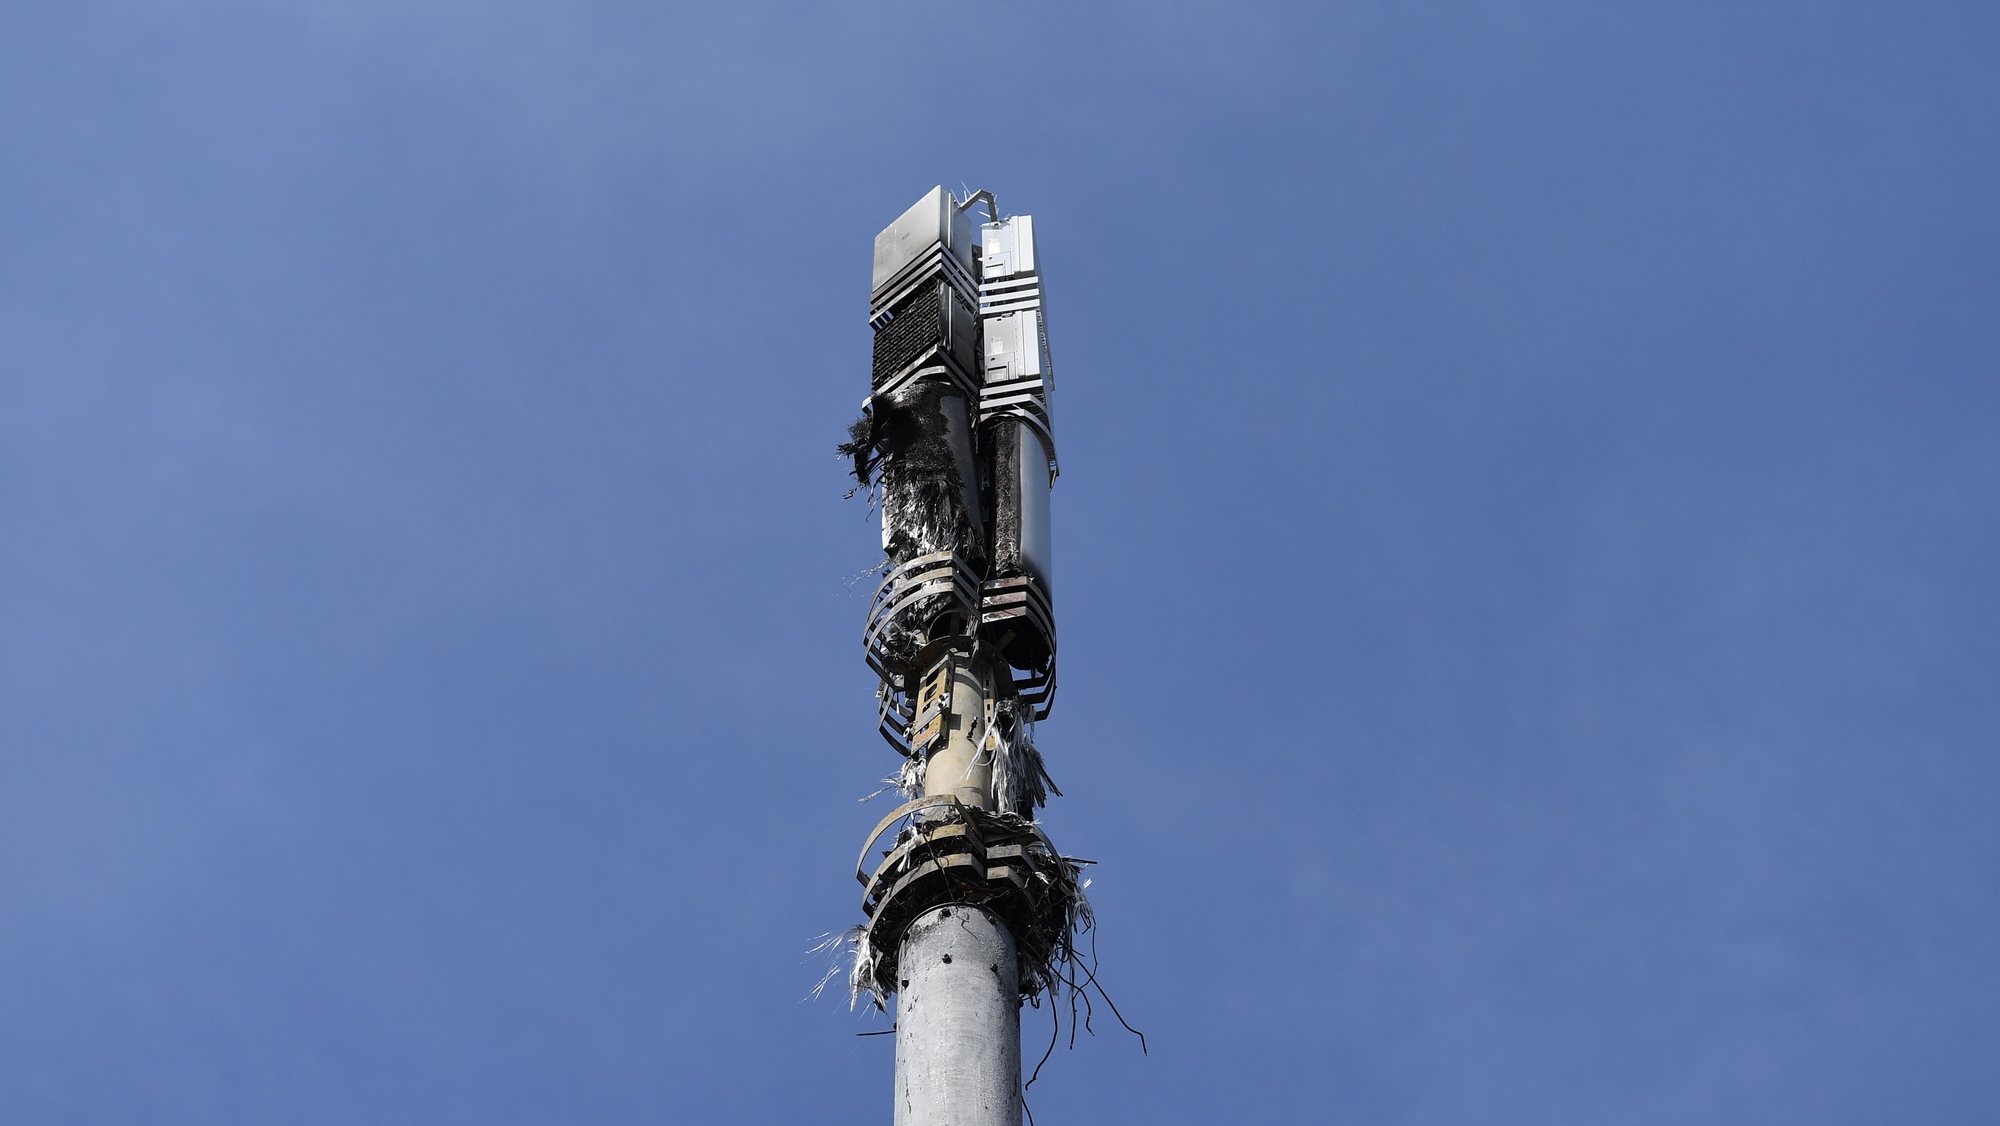 epa08364442 A burned down mobile phone mast in London, Britain, 15 April 2020. According to reports, at least 20 mobile phone masts across Britain are believed to have been vandalized and government and telecom sources are increasingly concerned about the impact of conspiracy theories linking coronavirus to 5G networks. British Prime Minister Johnson has announced that Britons can only leave their homes for essential reasons or may be fined, in order to reduce the spread of the SARS-CoV-2 coronavirus which causes the COVID-19 disease.  EPA/FACUNDO ARRIZABALAGA